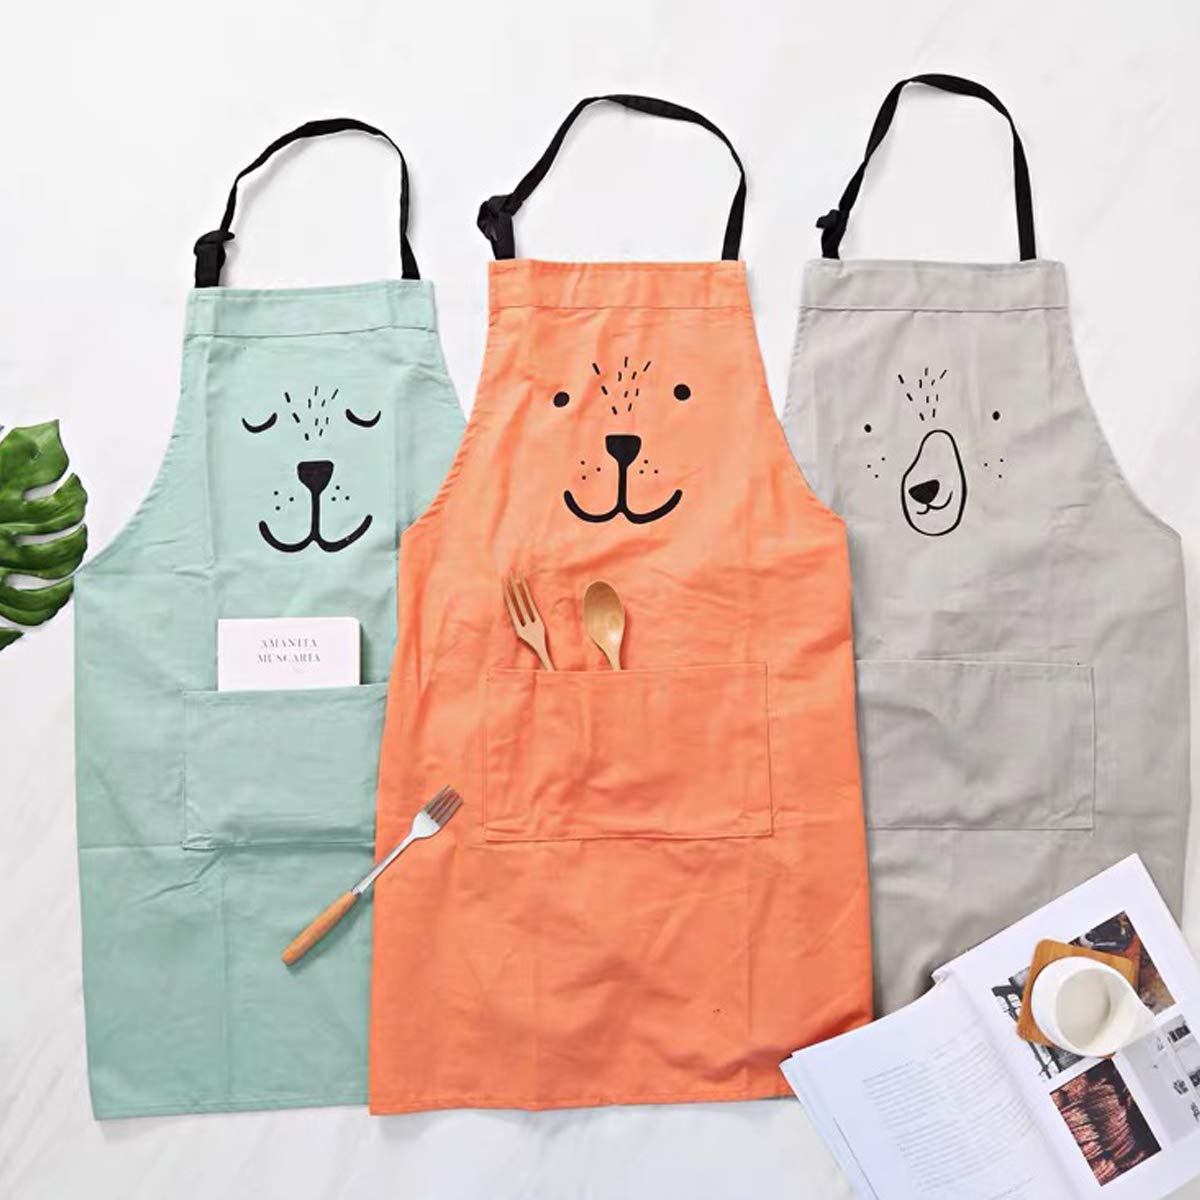 HILLHOME 2 Pack Cotton Adjustable Parent and Child Apron with Pockets Great Gift For Adult and Kid Baking,Painting,Mommy and Me Matching Set